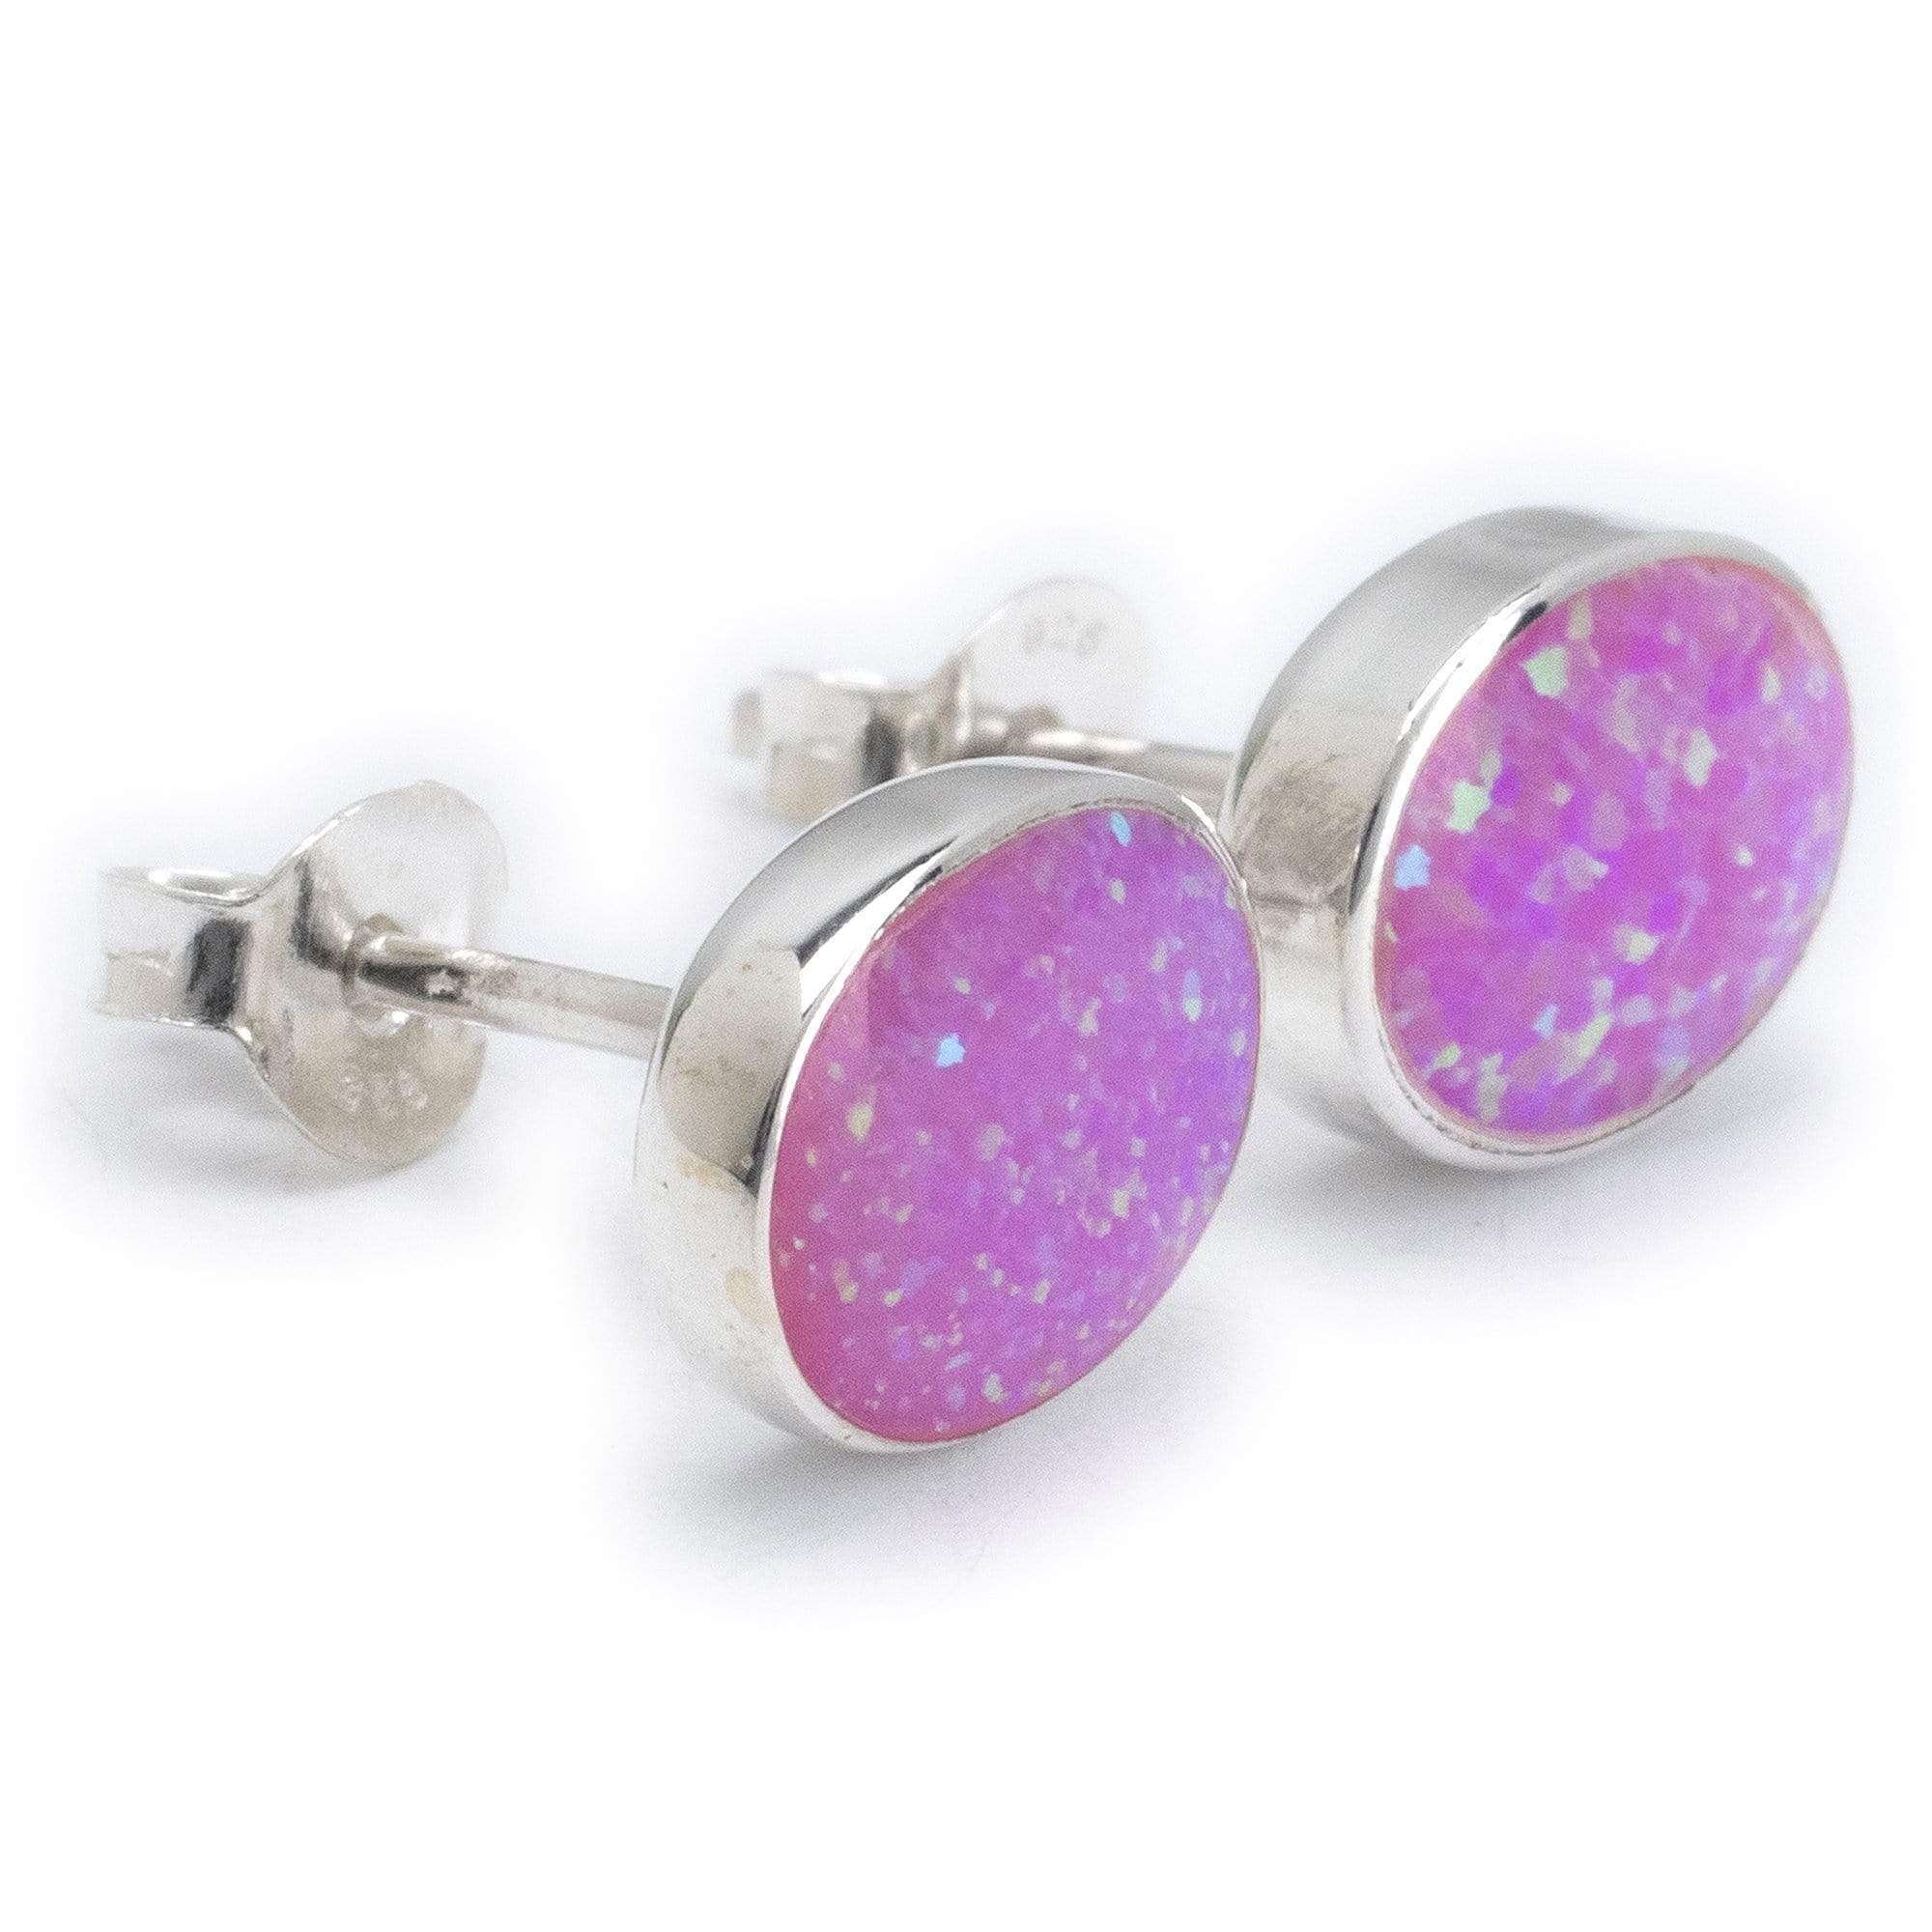 Kalifano Southwest Silver Jewelry Pink Opal Oval 925 Sterling Silver Earring with Stud Backing Handmade NME.0023.PO